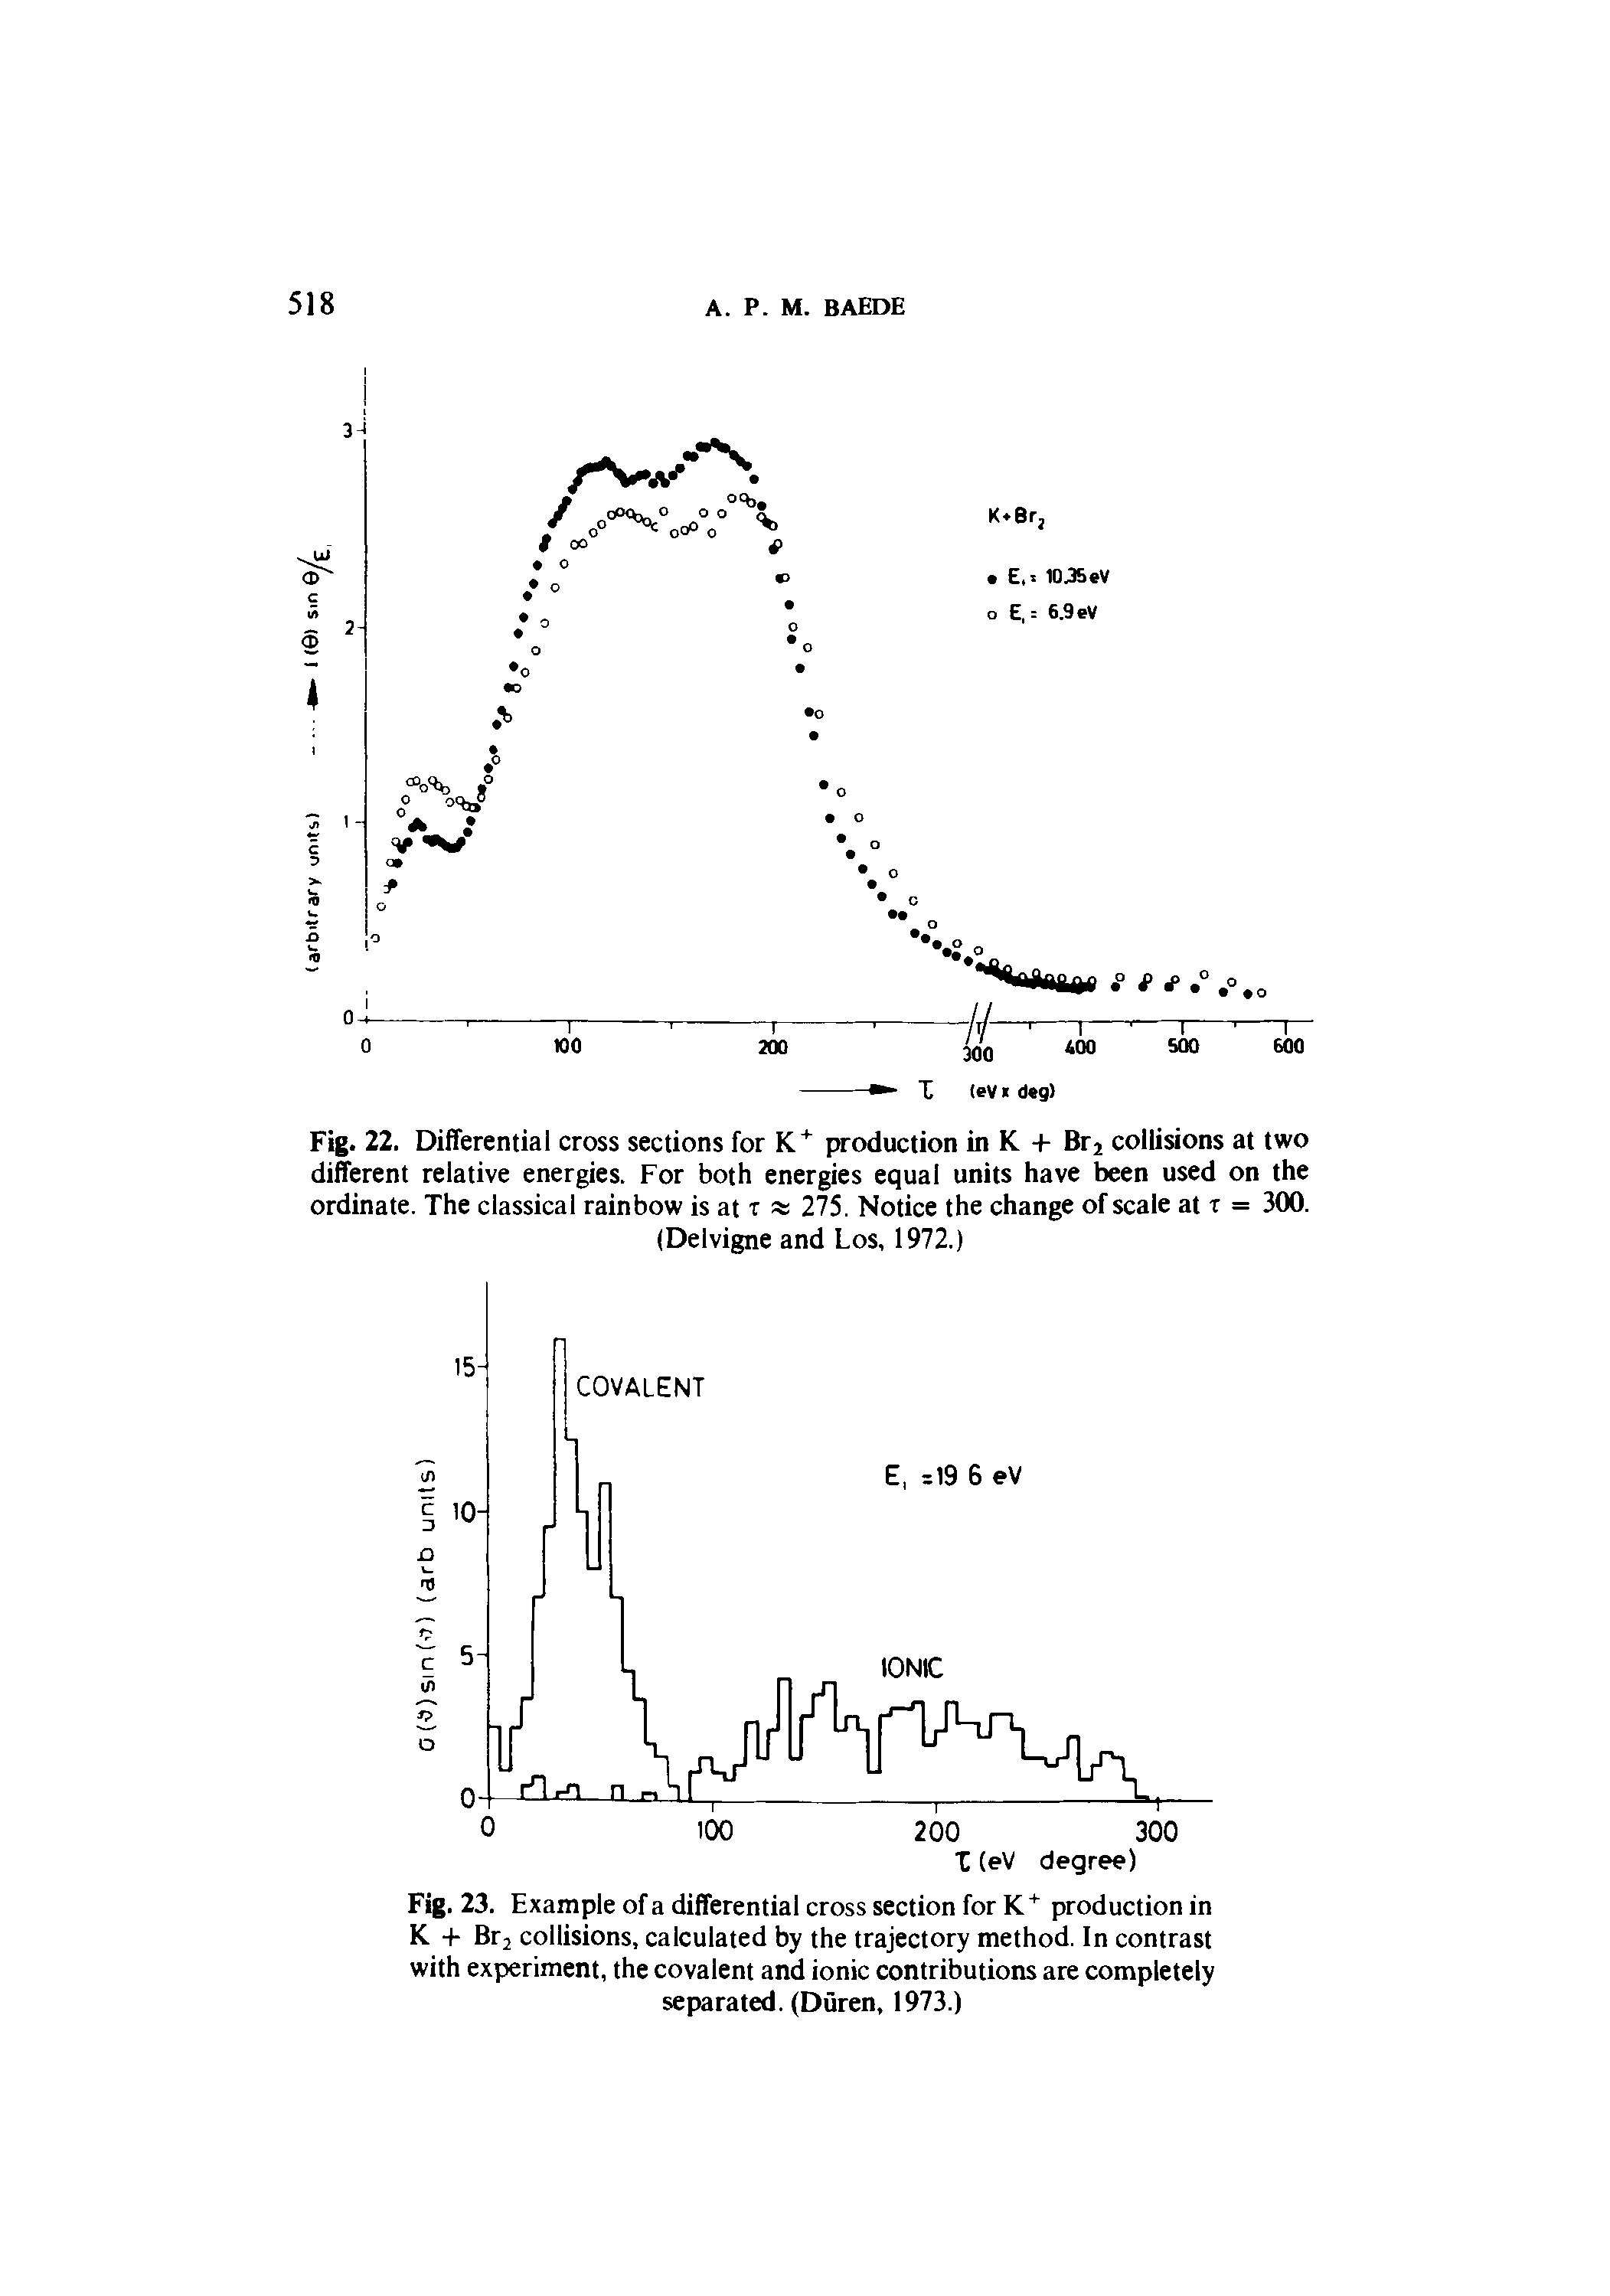 Fig. 23. Example of a differential cross section for K+ production in K + Br2 collisions, calculated by the trajectory method. In contrast with experiment, the covalent and ionic contributions are completely separated. (Duren, 1973.)...